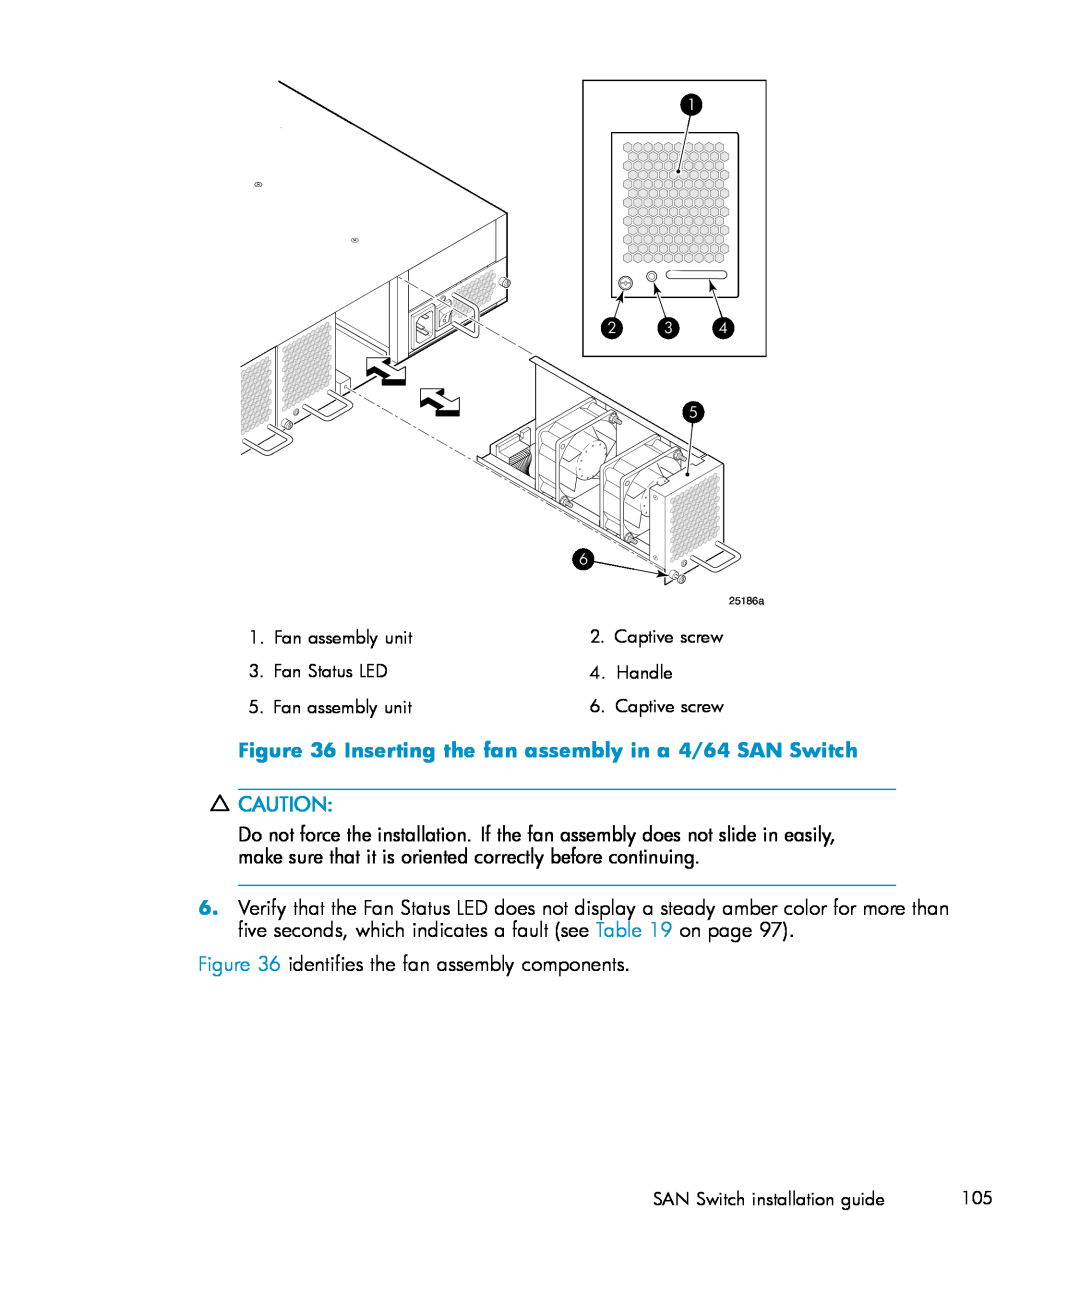 IBM AA-RWF3A-TE manual Inserting the fan assembly in a 4/64 SAN Switch, Scale 3/8 = 